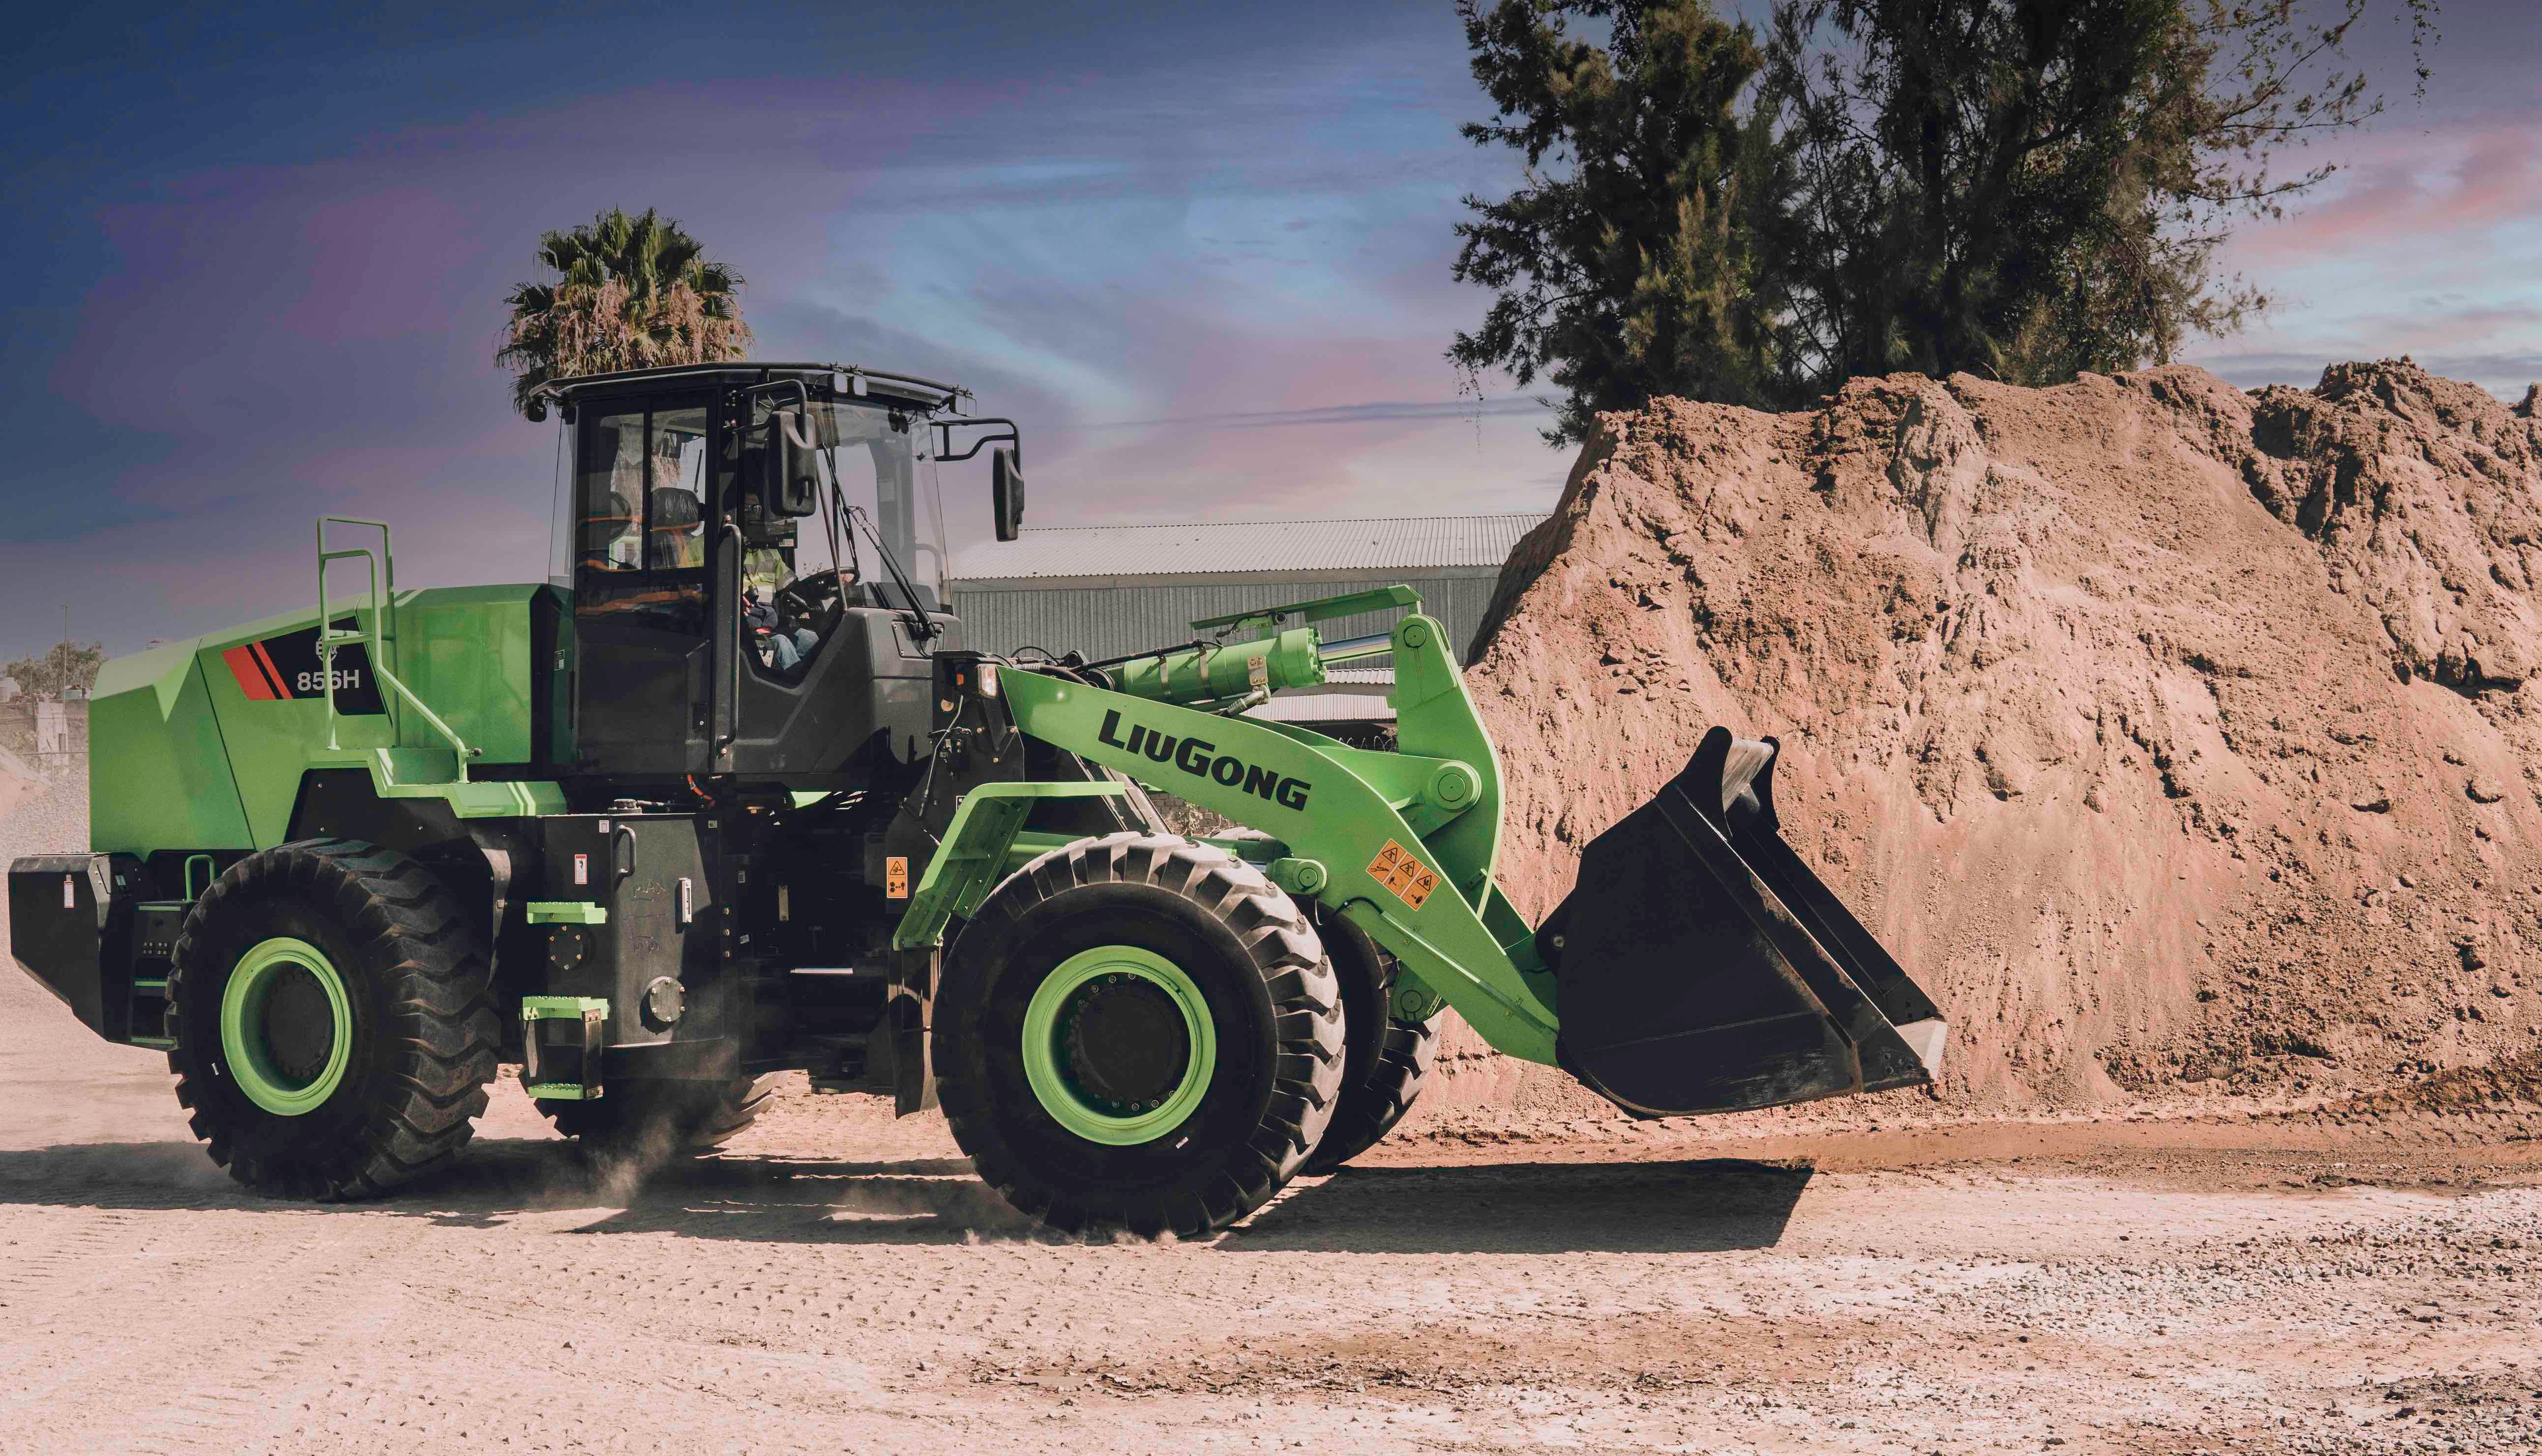 LiuGong 856H-E Max electric wheel loader by dirt pile